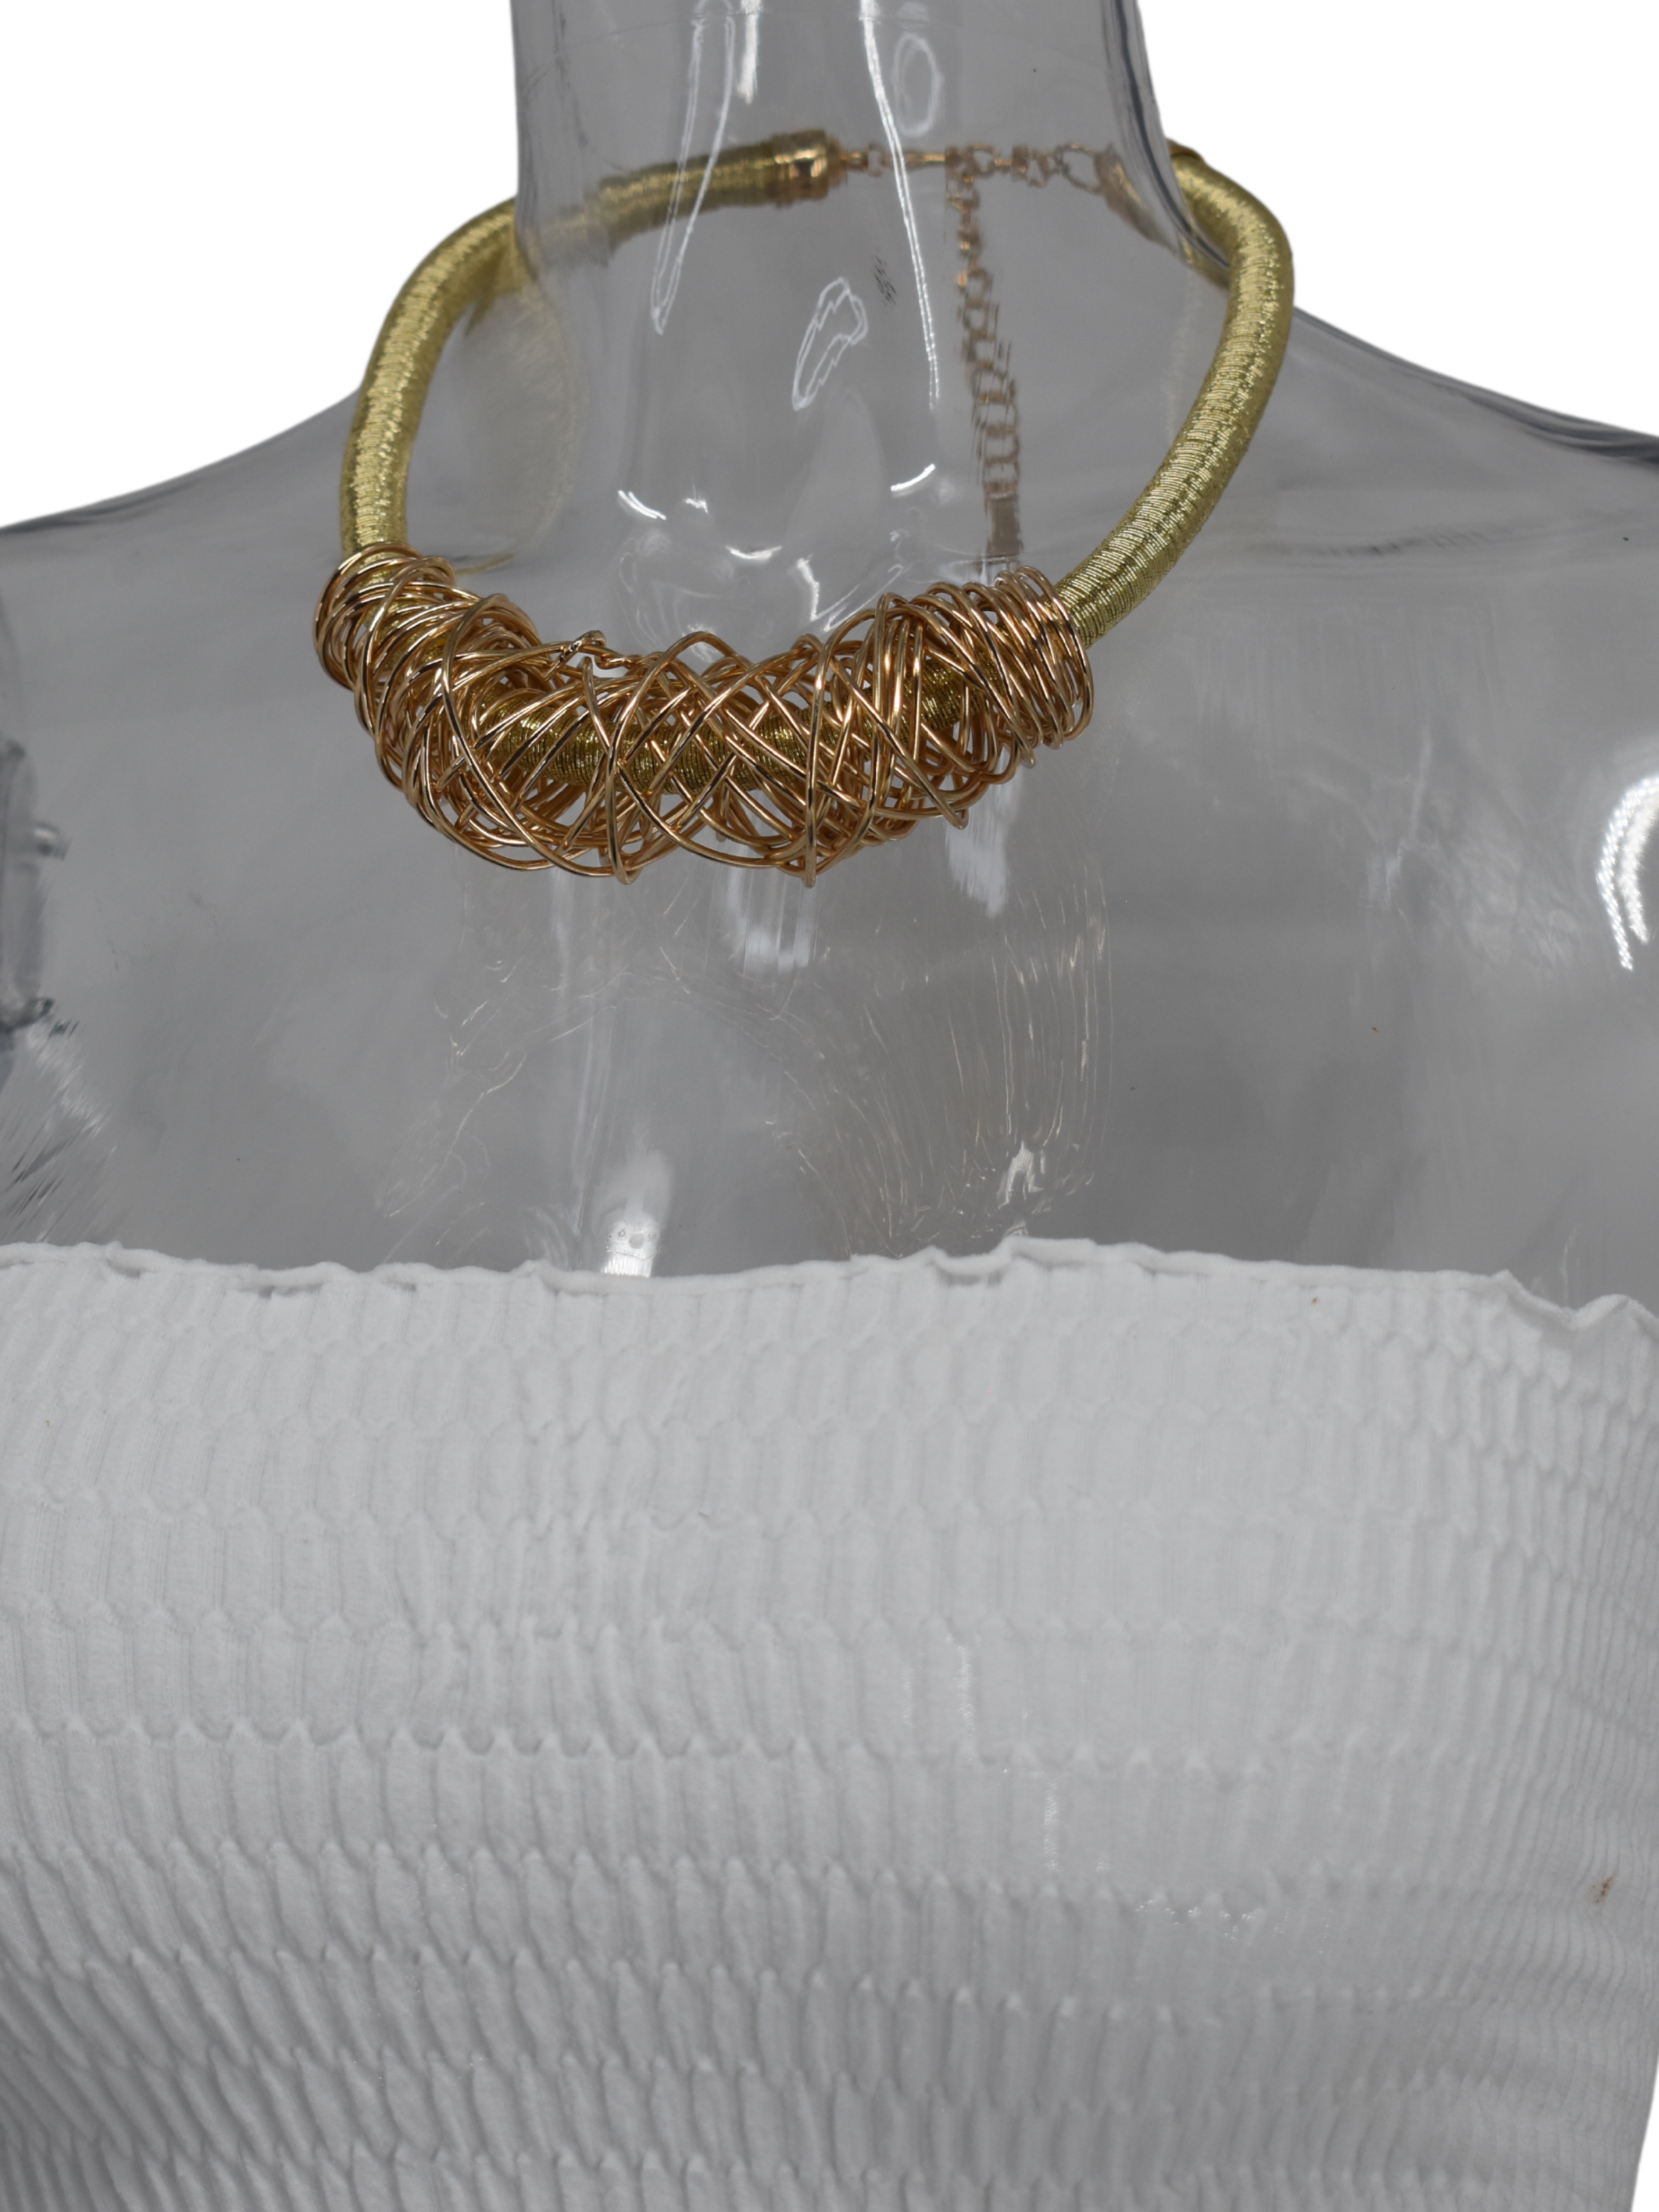 We are firm believers that our Isla gold necklace with gold wrapped accents will not let you down.